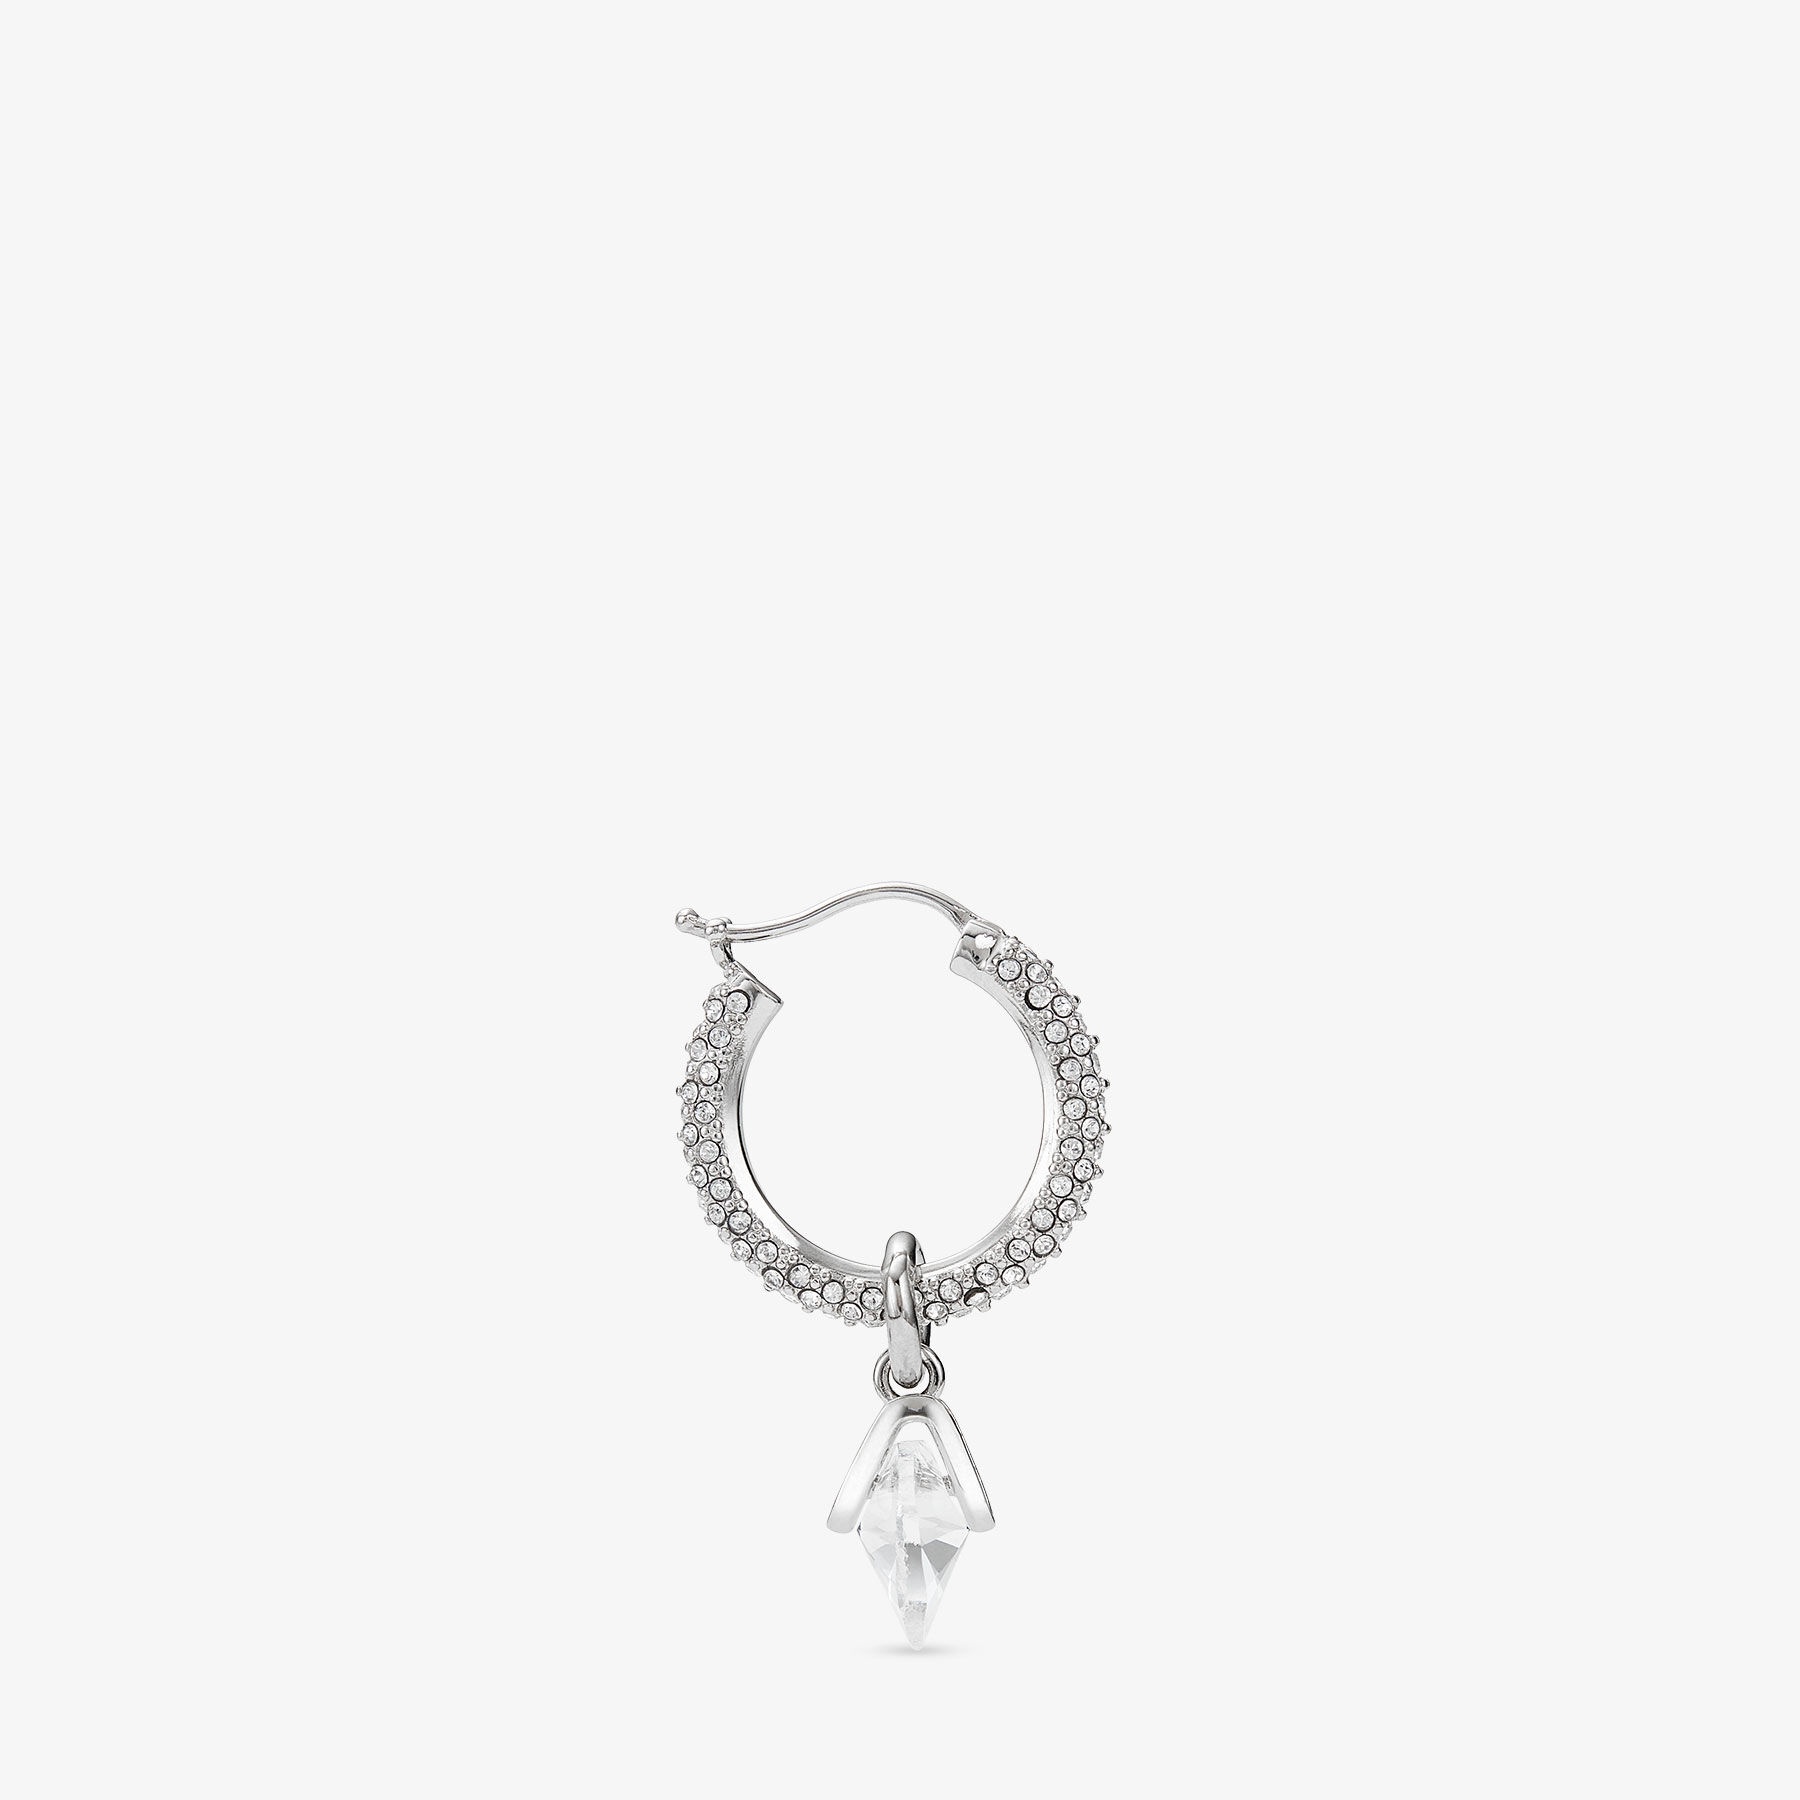 Heart Hoops
Silver-Finish Heart Hoop Earrings with Crystals - 5